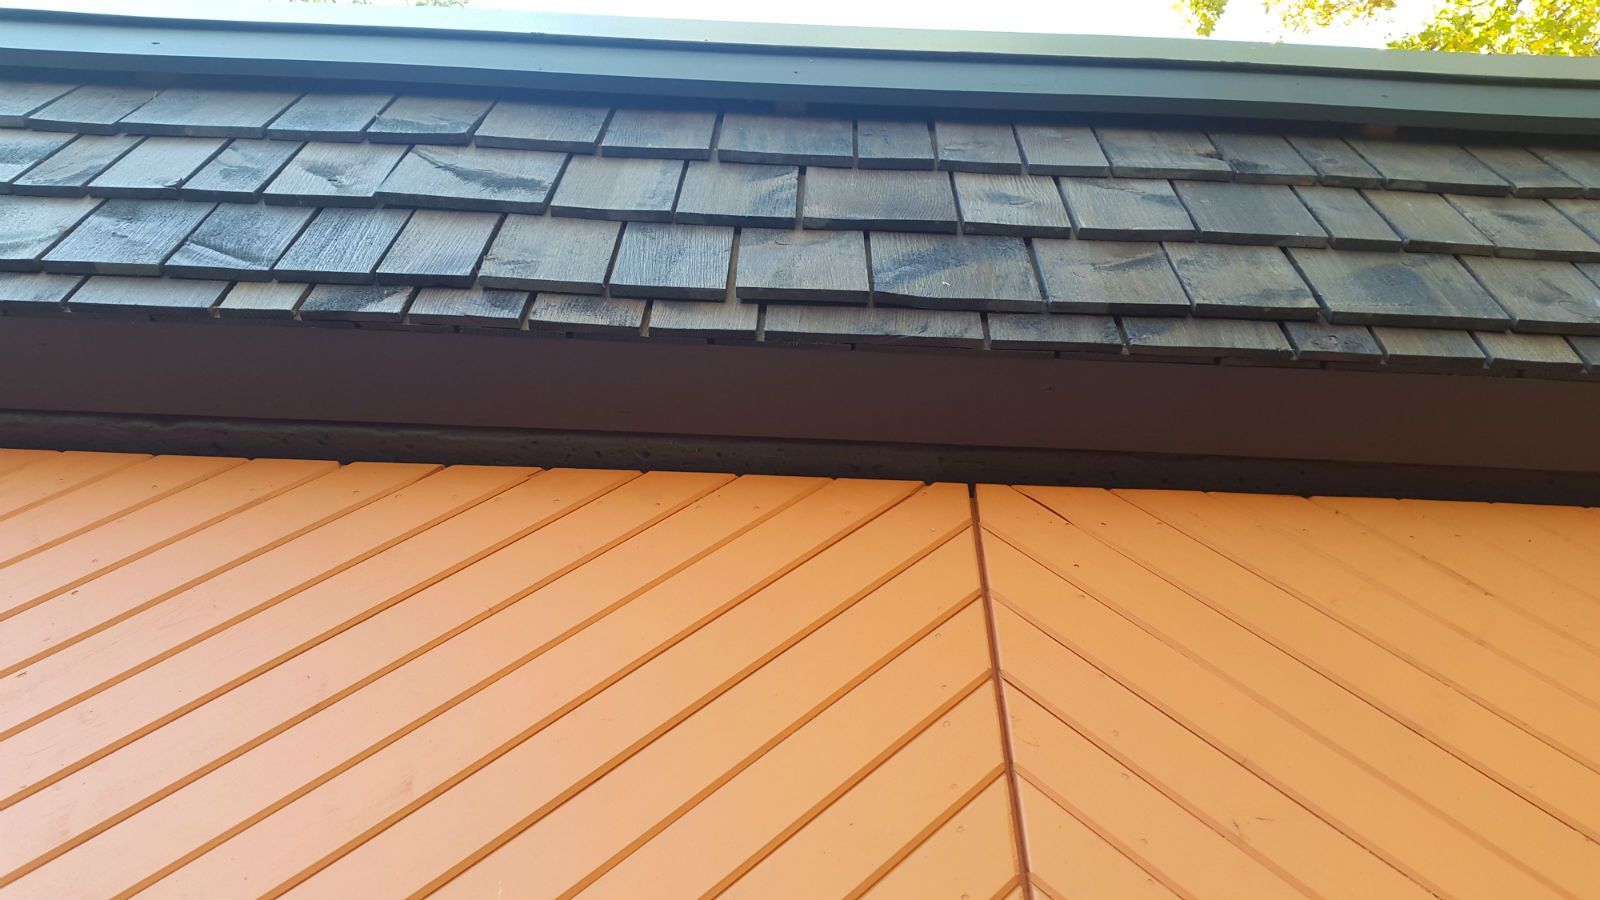 , roof and wall decking with wooden shingles, wood shingles, wood roofs